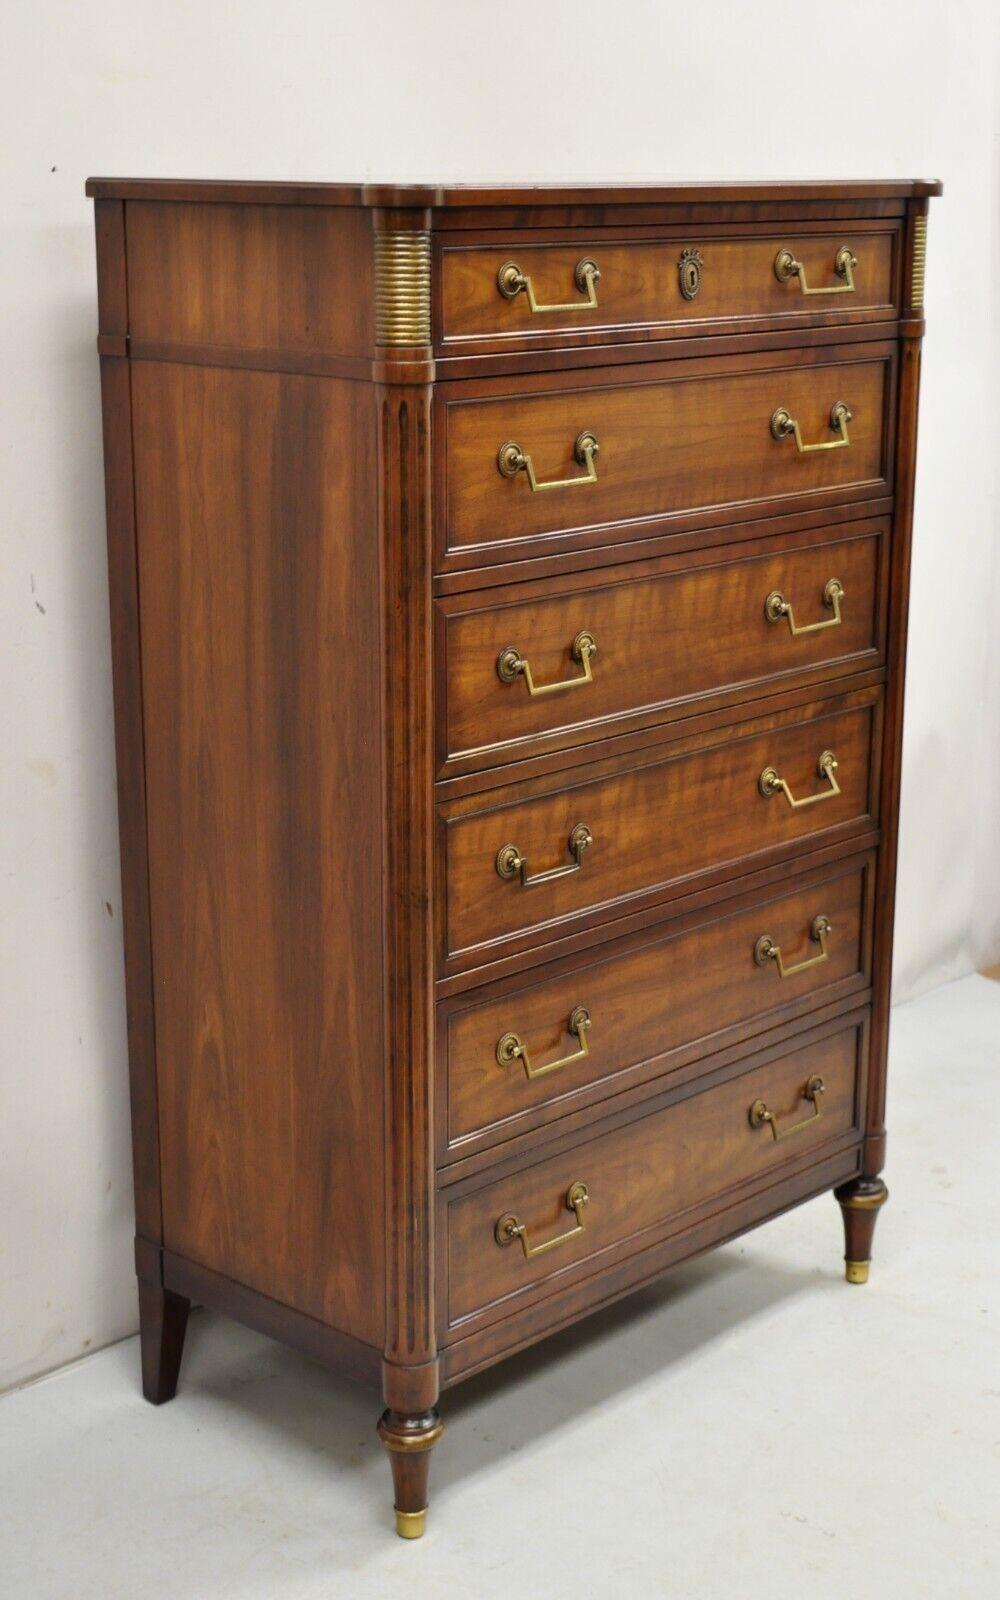 Kindel Milano Directoire French Louis XVI Style 6 Drawer Highboy Cherry Wood Tall Chest Dresser. Item features brass metal ormolu, beautiful wood grain, 6 dovetailed drawers, working lock and key, original tag, quality American craftsmanship. Circa